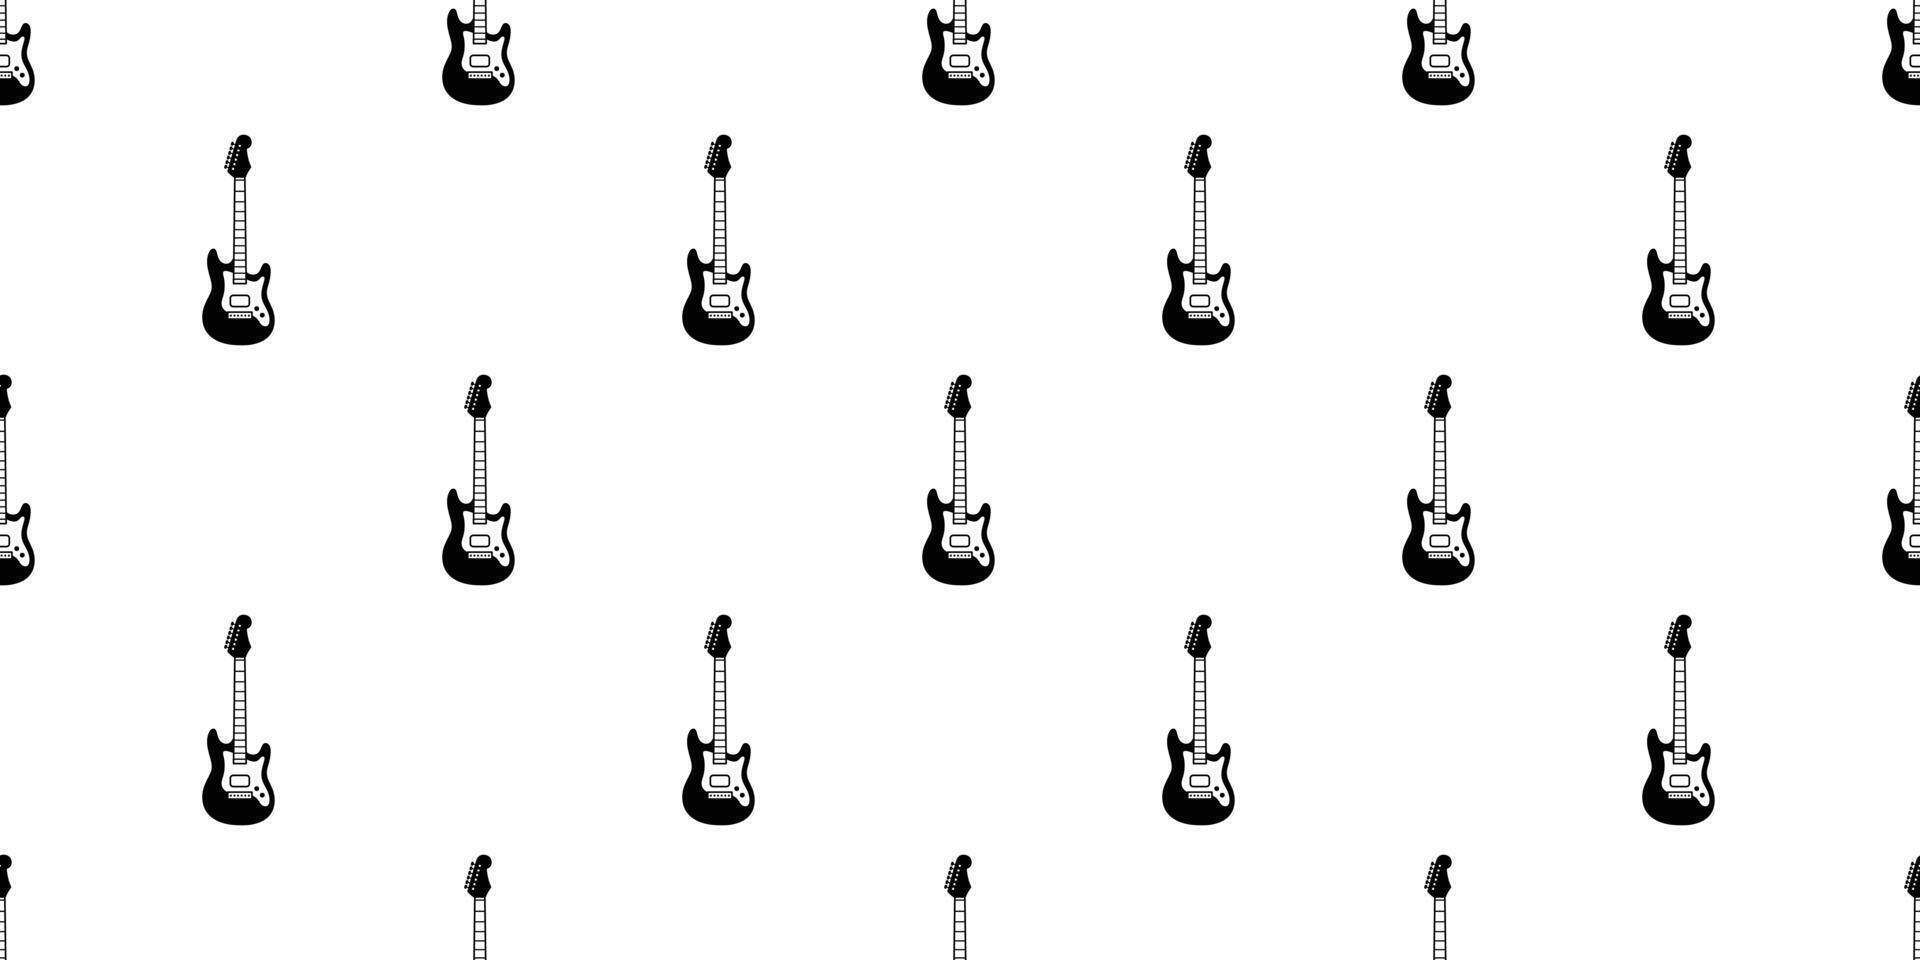 guitar seamless pattern vector electric bass ukulele icon logo symbol music scarf isolated repeat wallpaper tile background graphic cartoon illustration doodle design